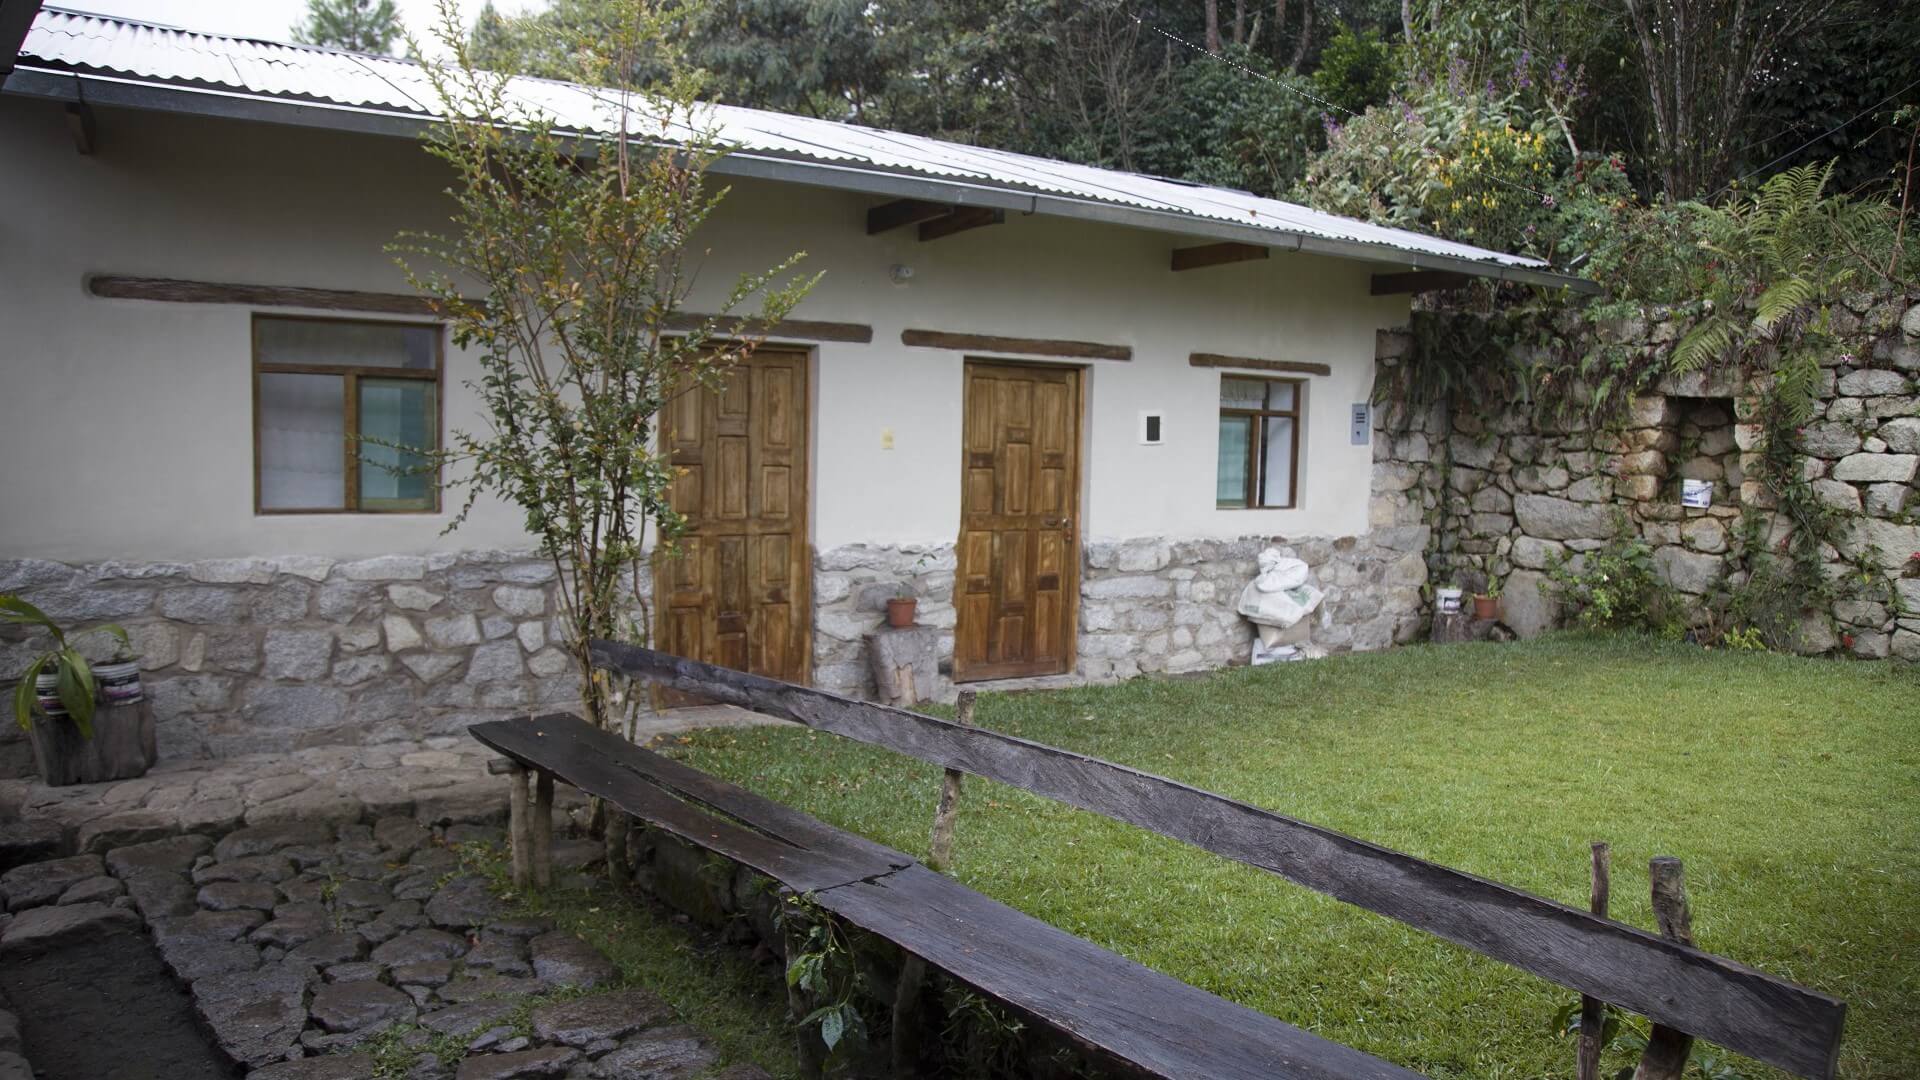 The tourist accommodation of coffee farmers Enrique and Teófila along the Coffee Route to Machu Picchu - RESPONSible Travel Peru